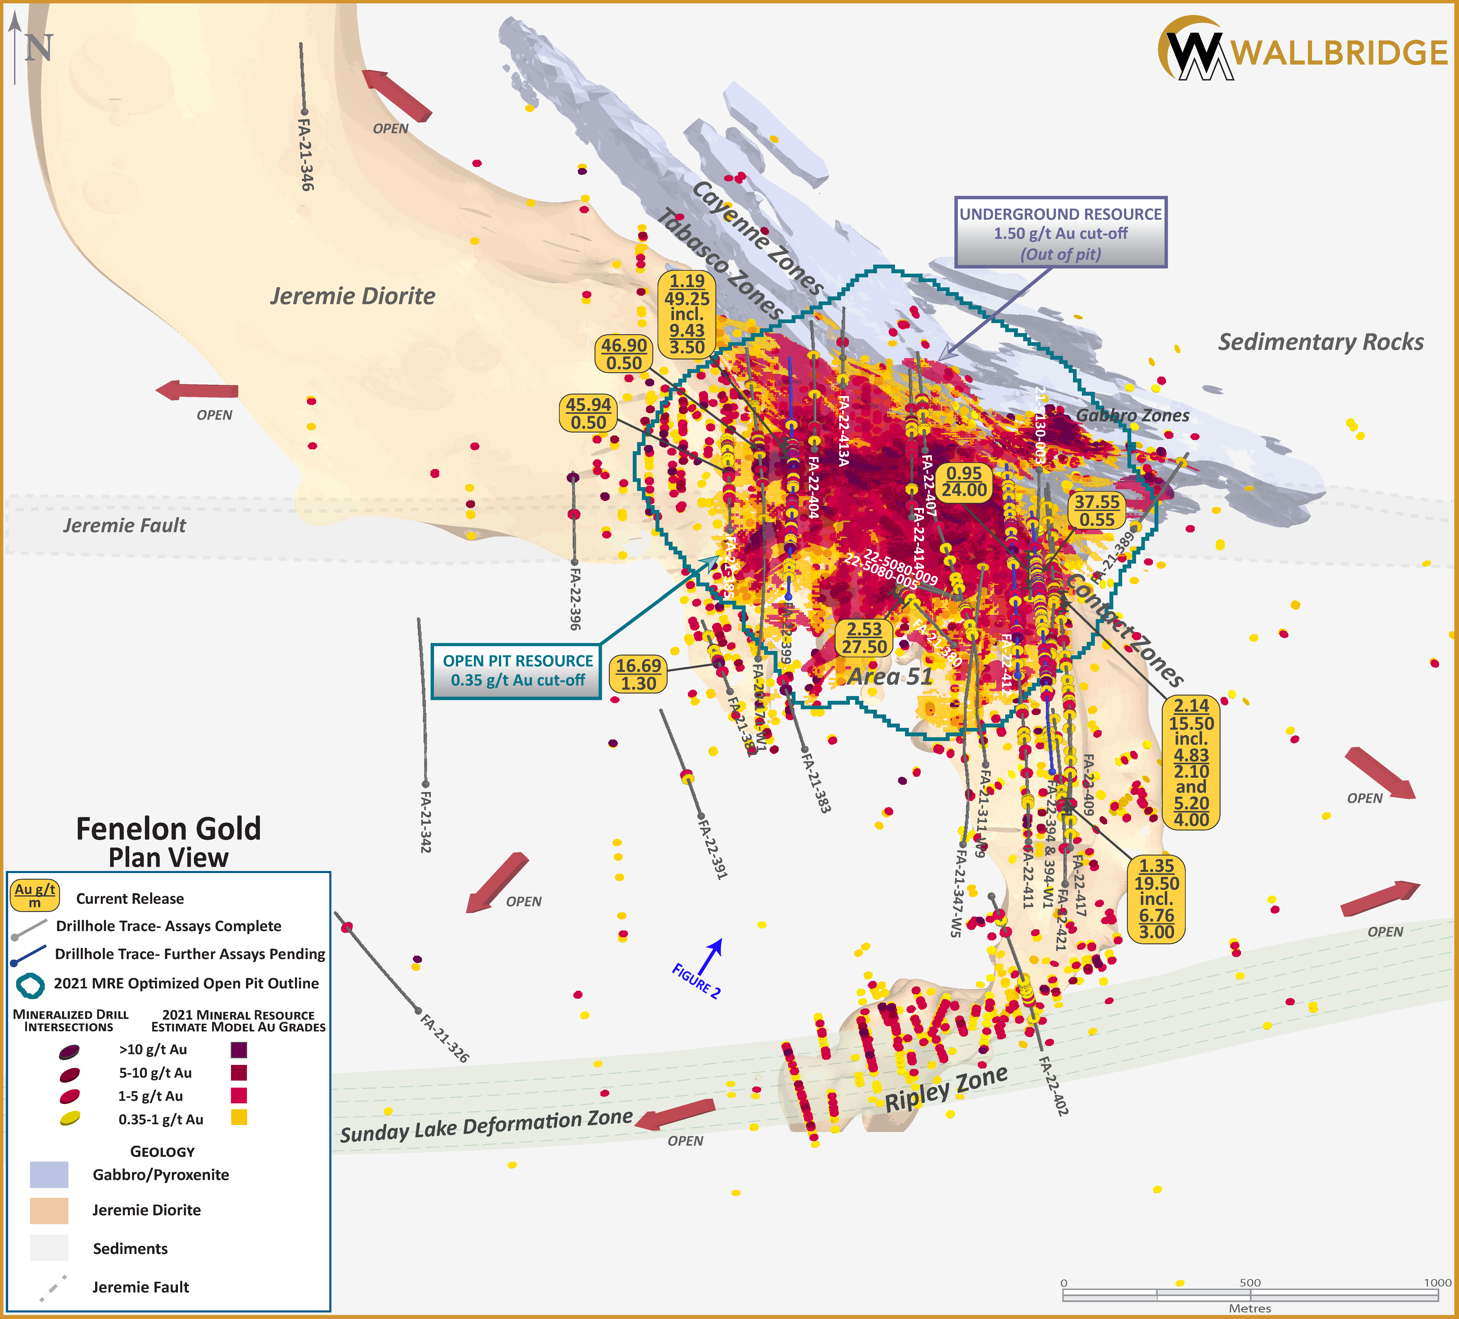 Wallbridge Expands Fenelon Gold System in Multiple Directions